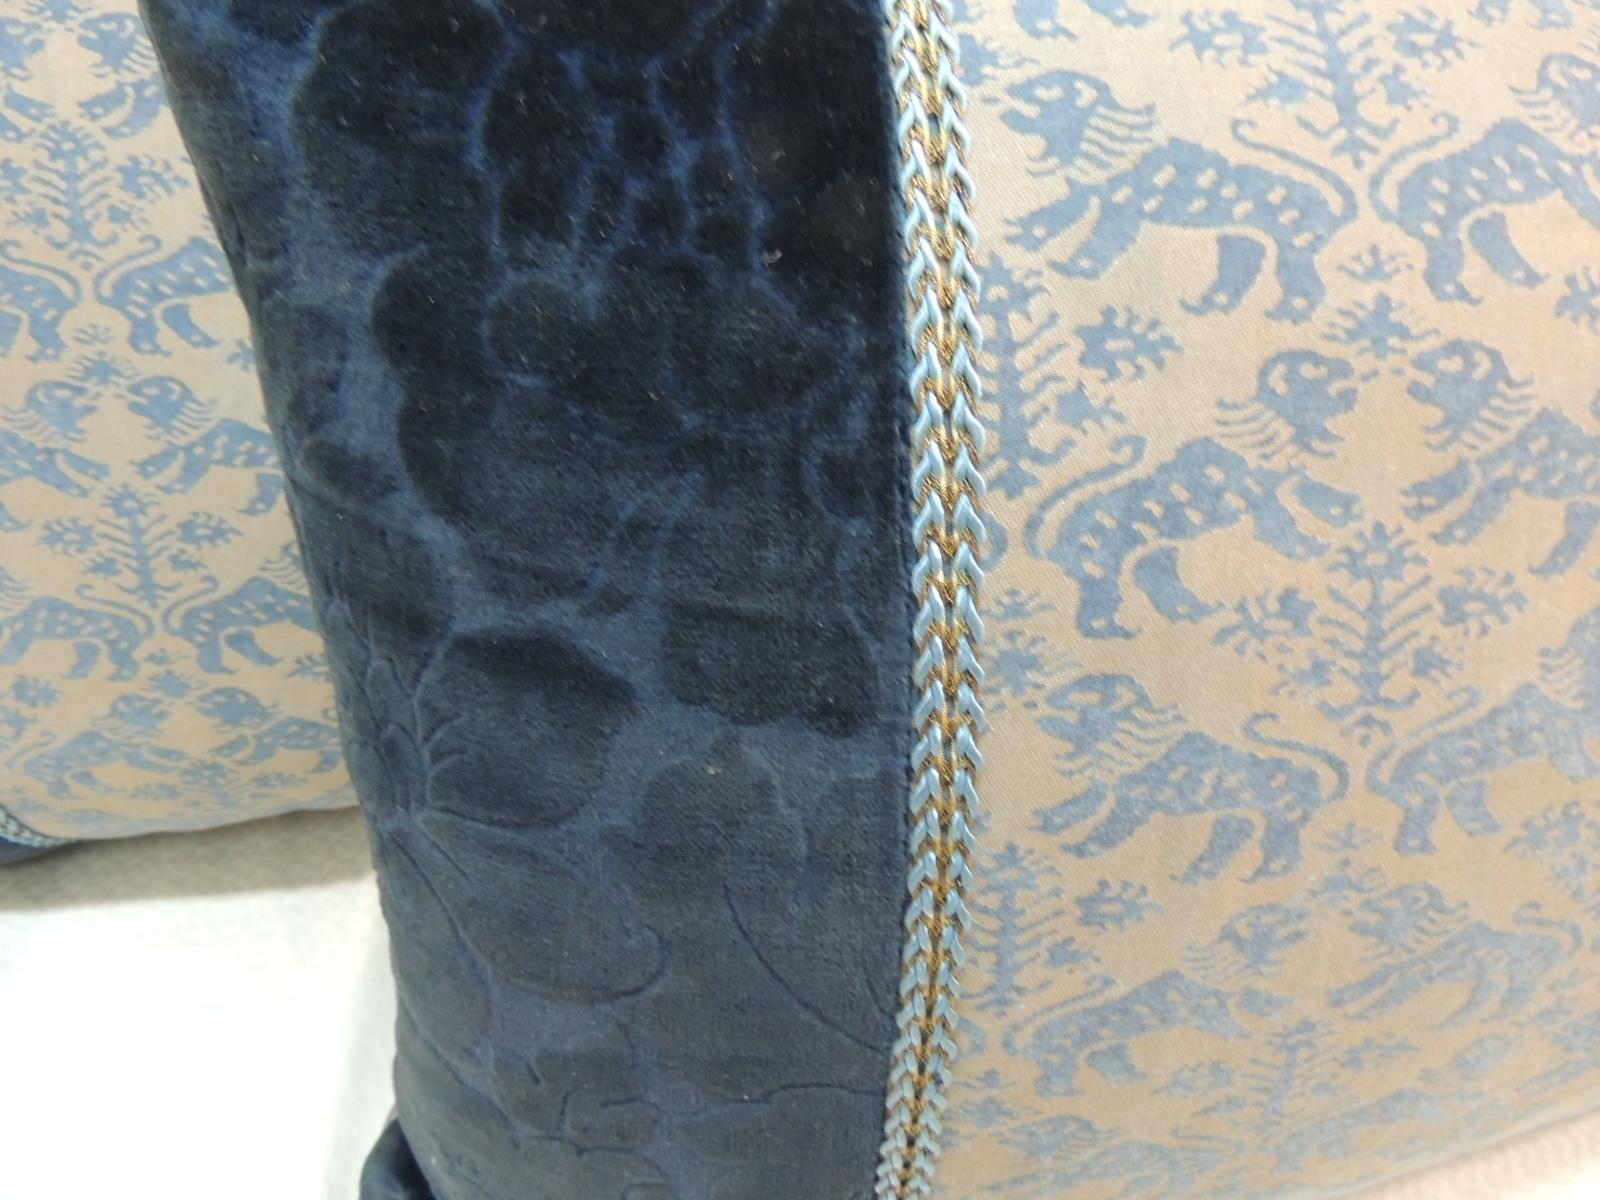 Baroque Revival Vintage Fortuny “Richelieu” Blue on Silver Decorative Bolster Pillow